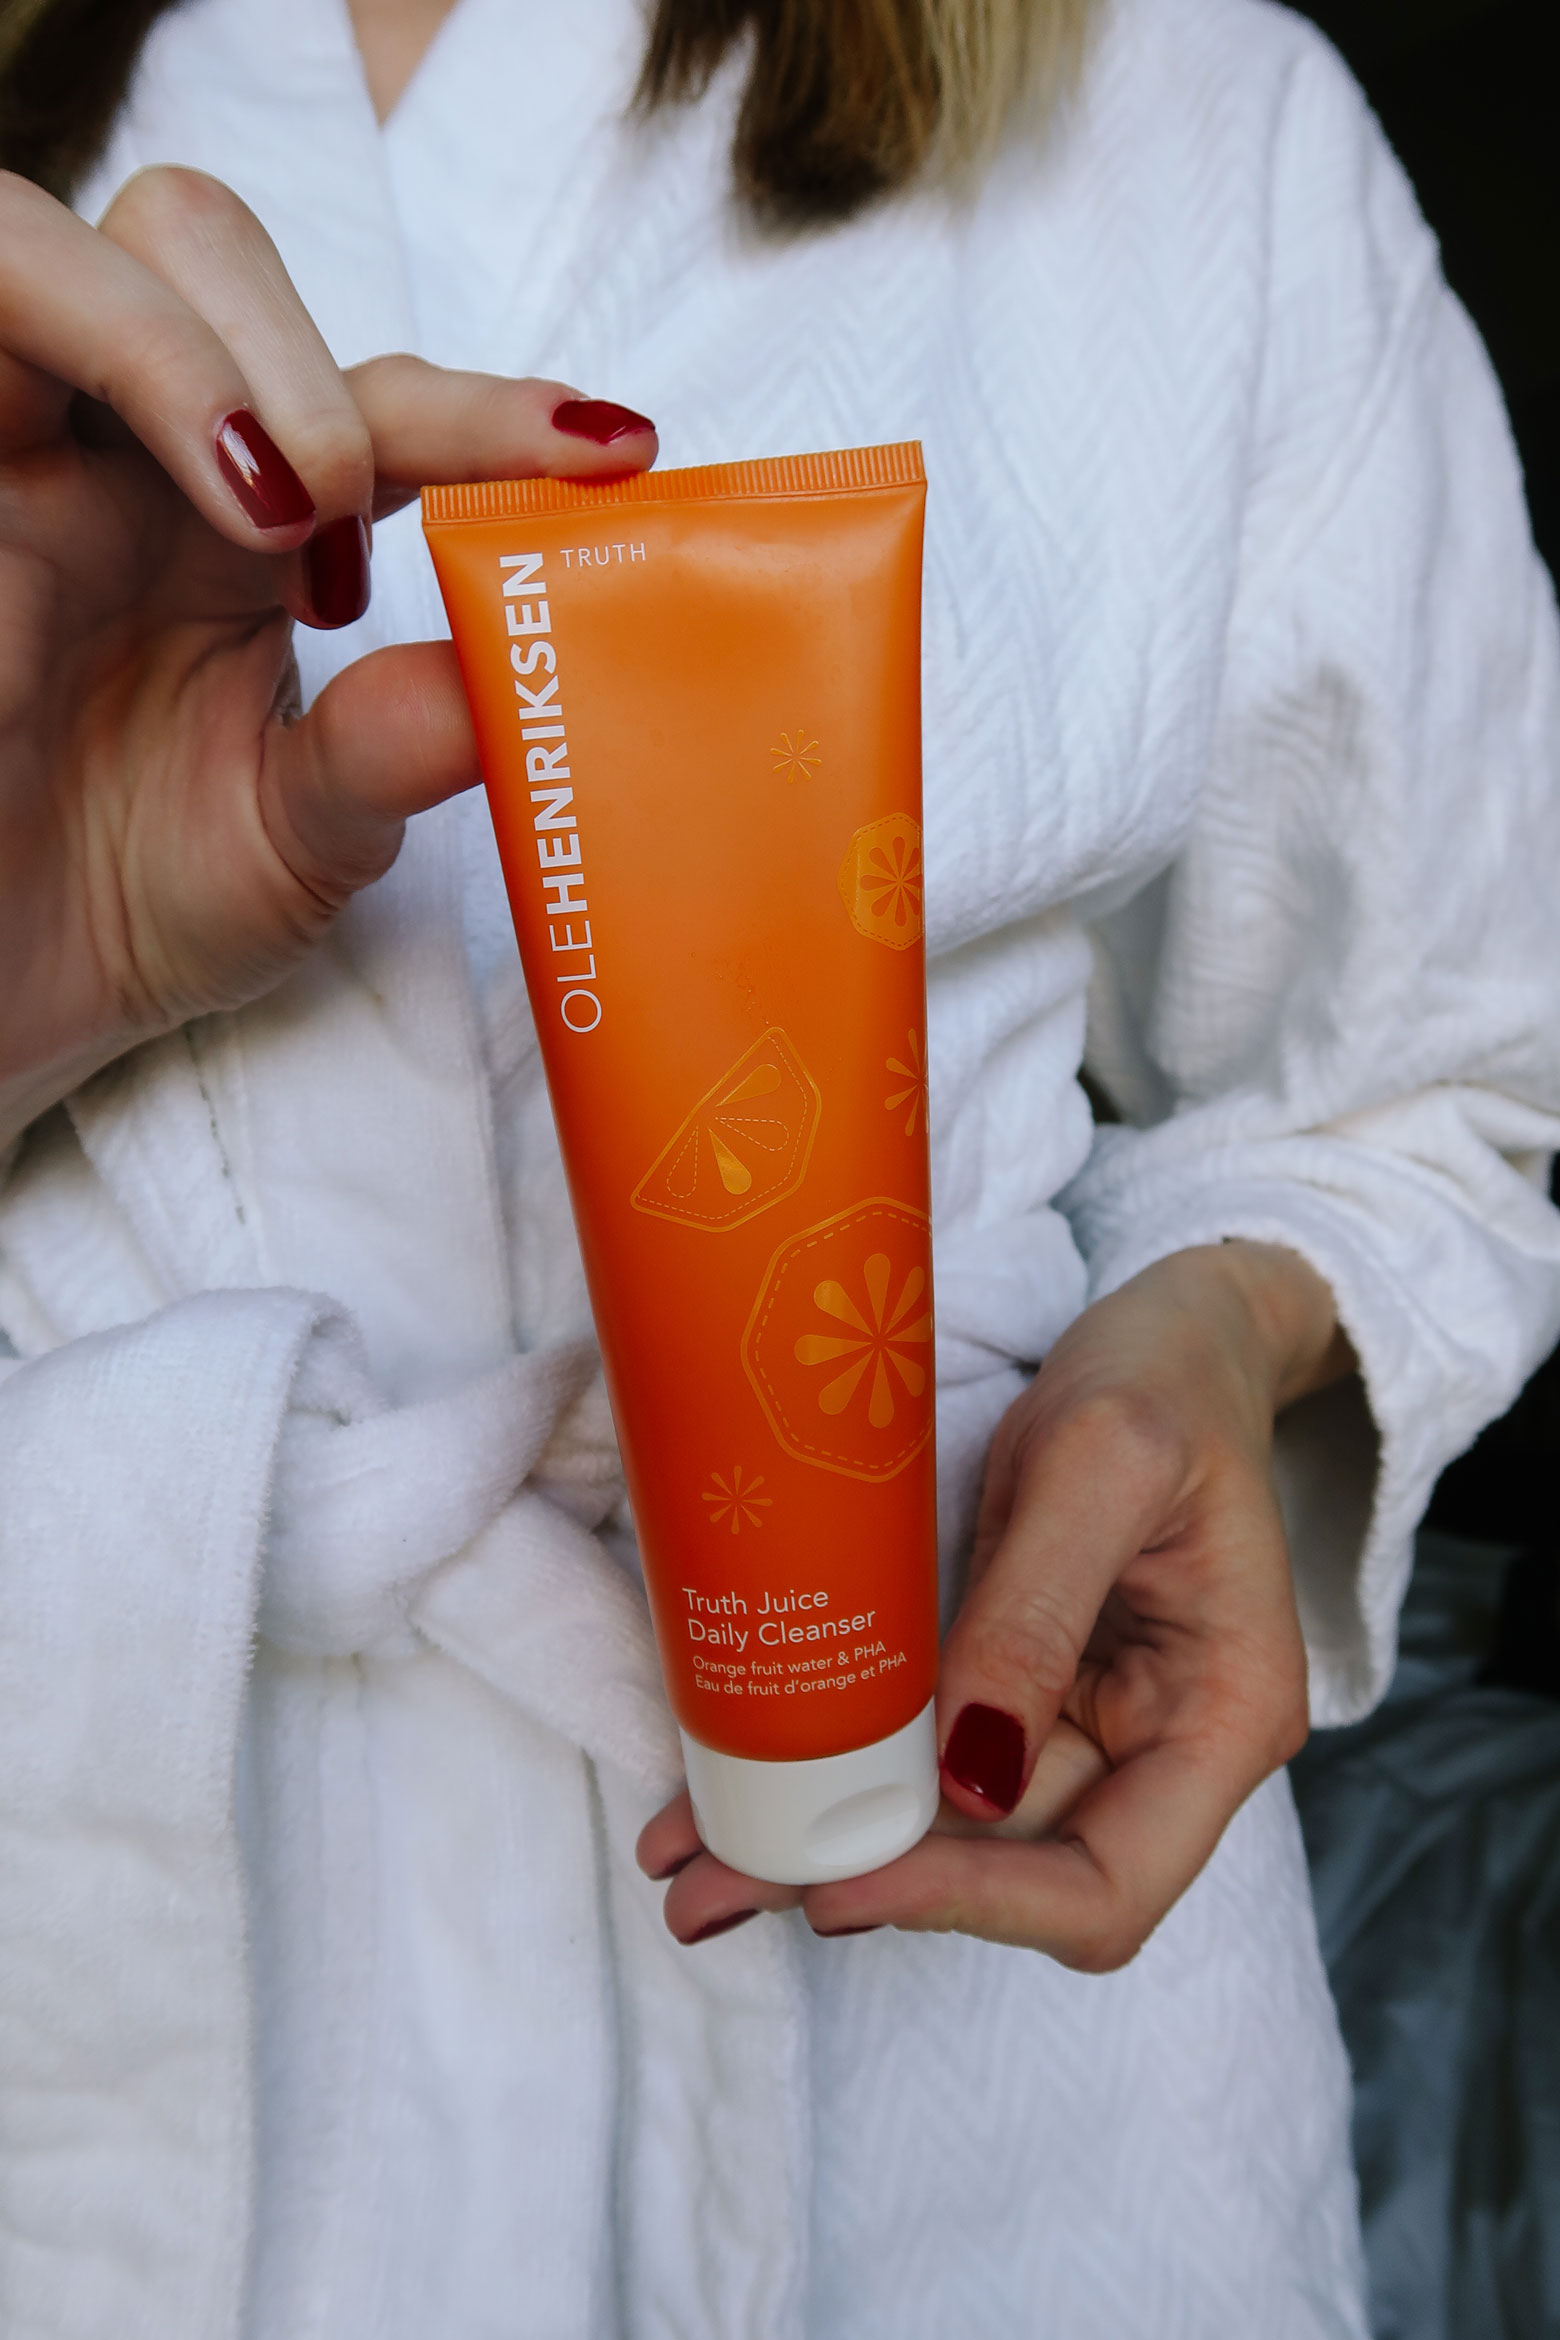 Hola, Ole! Review of Ole Henriksen Pure Truth Melting Cleanser